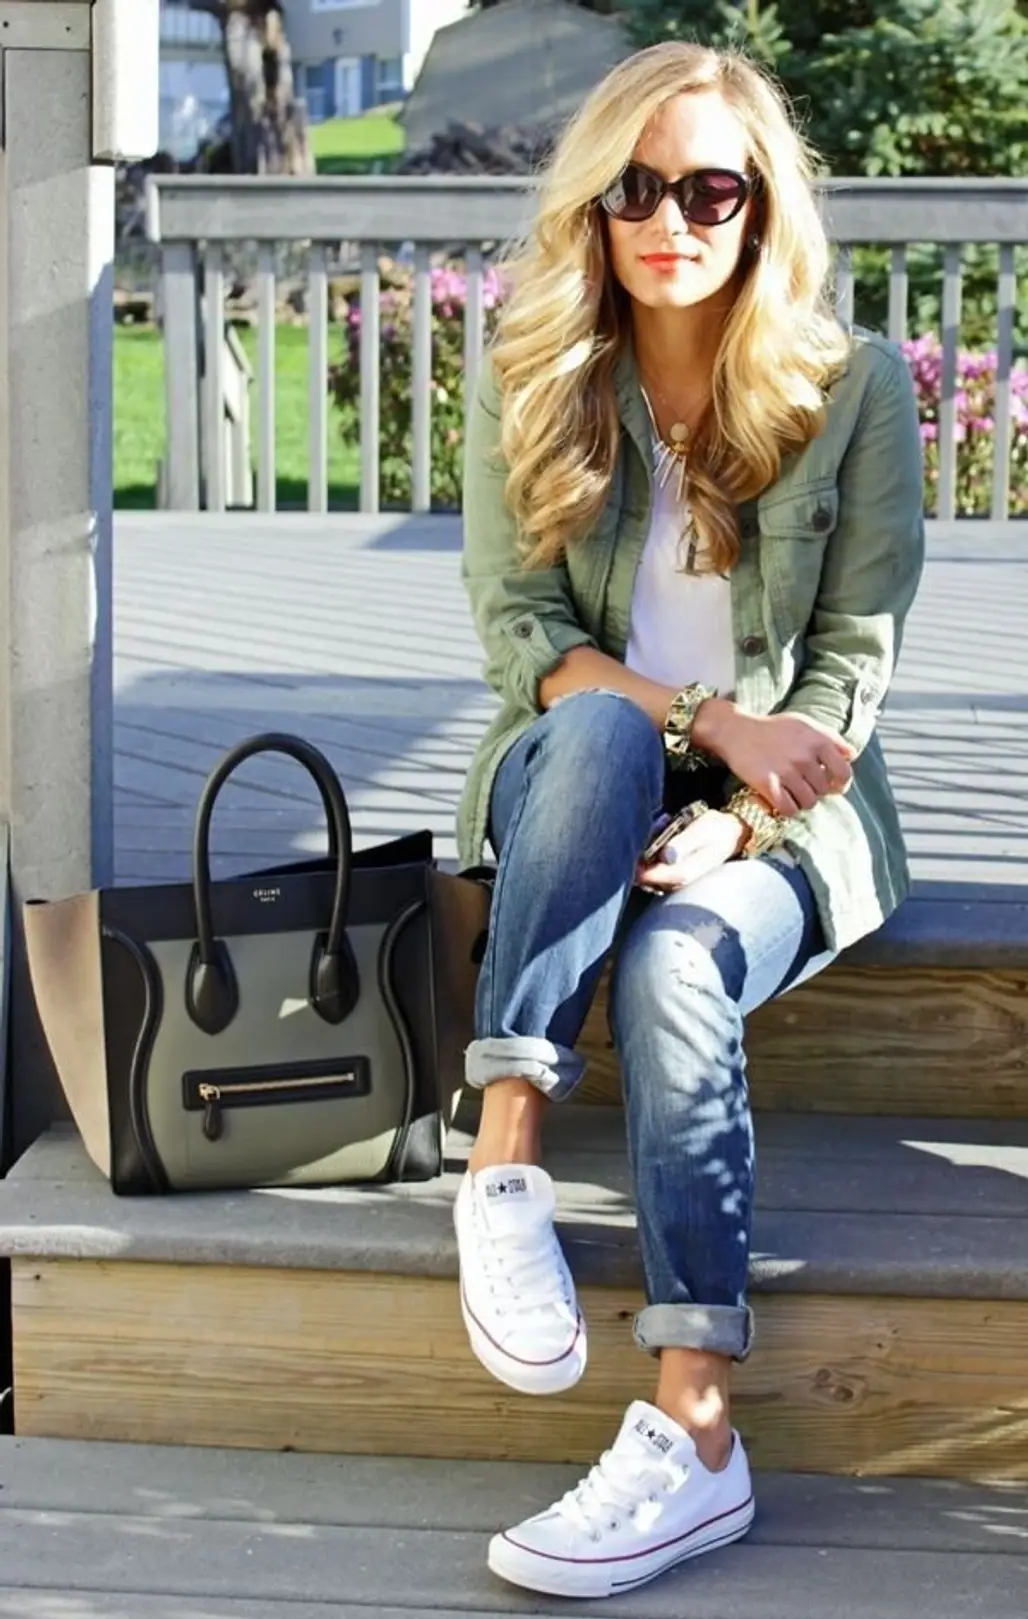 Rock Your Kicks with a Green Military Jacket and Killer Bag